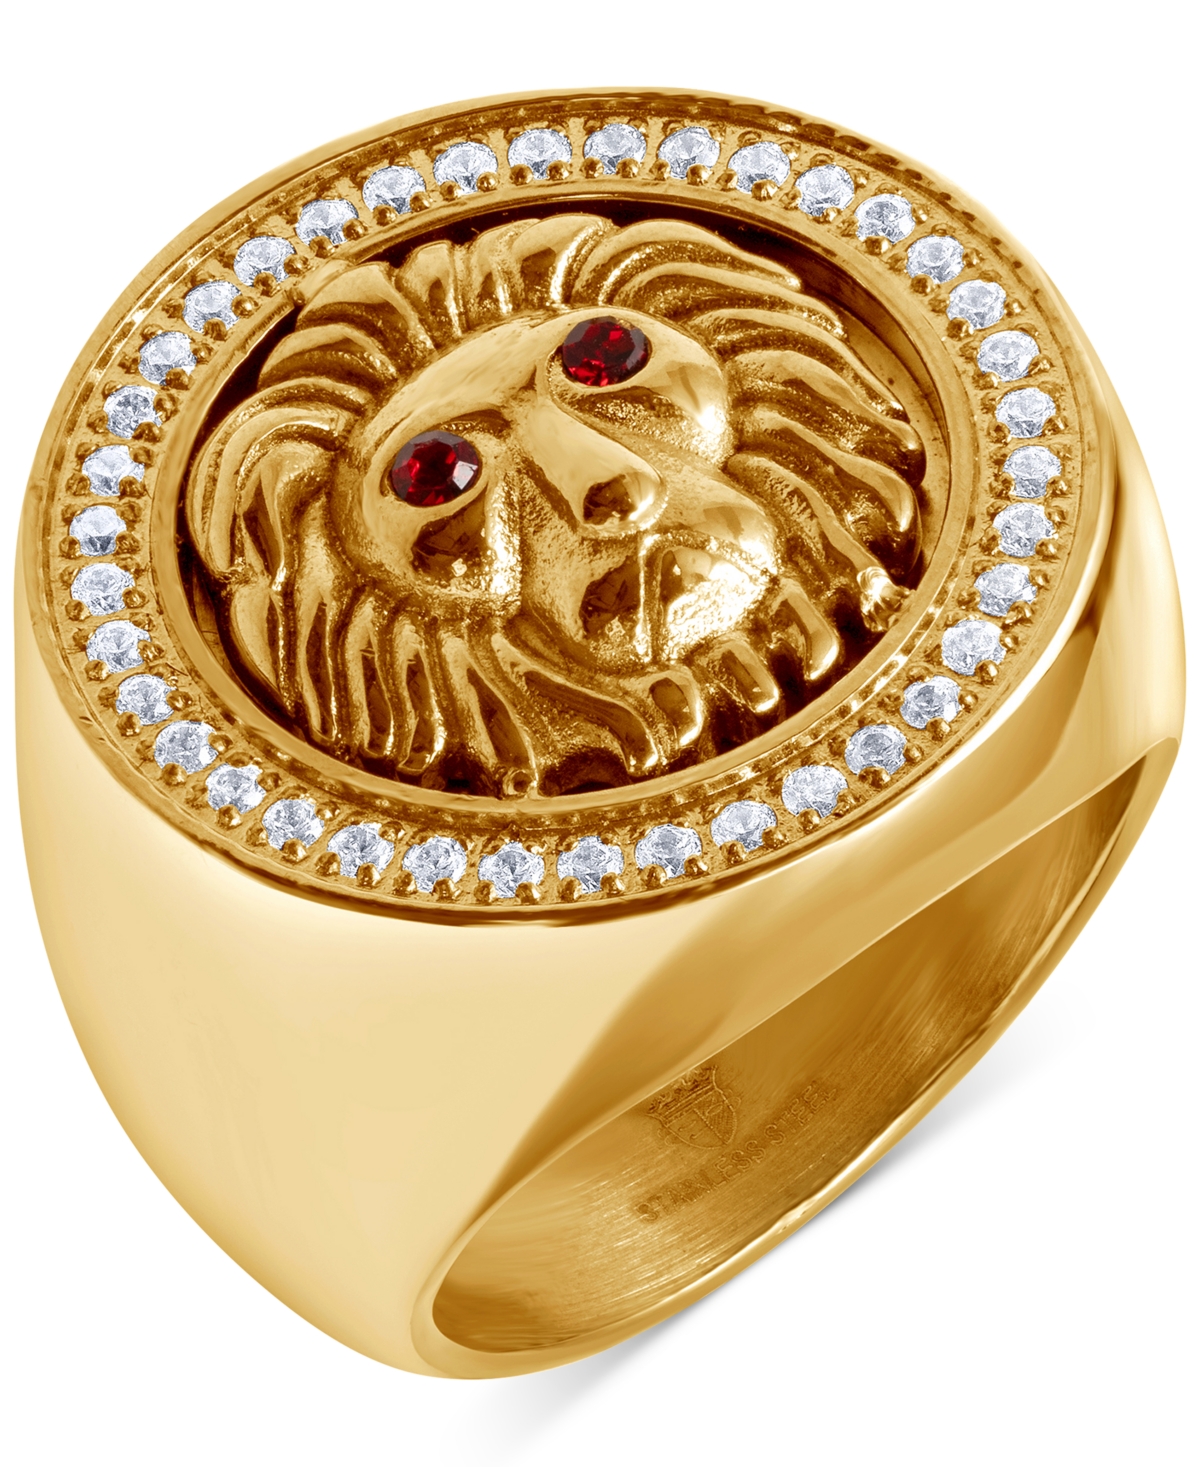 Men's Cubic Zirconia Lion Head Halo Ring in Gold-Tone Ion-Plated Stainless Steel - Gold-Tone